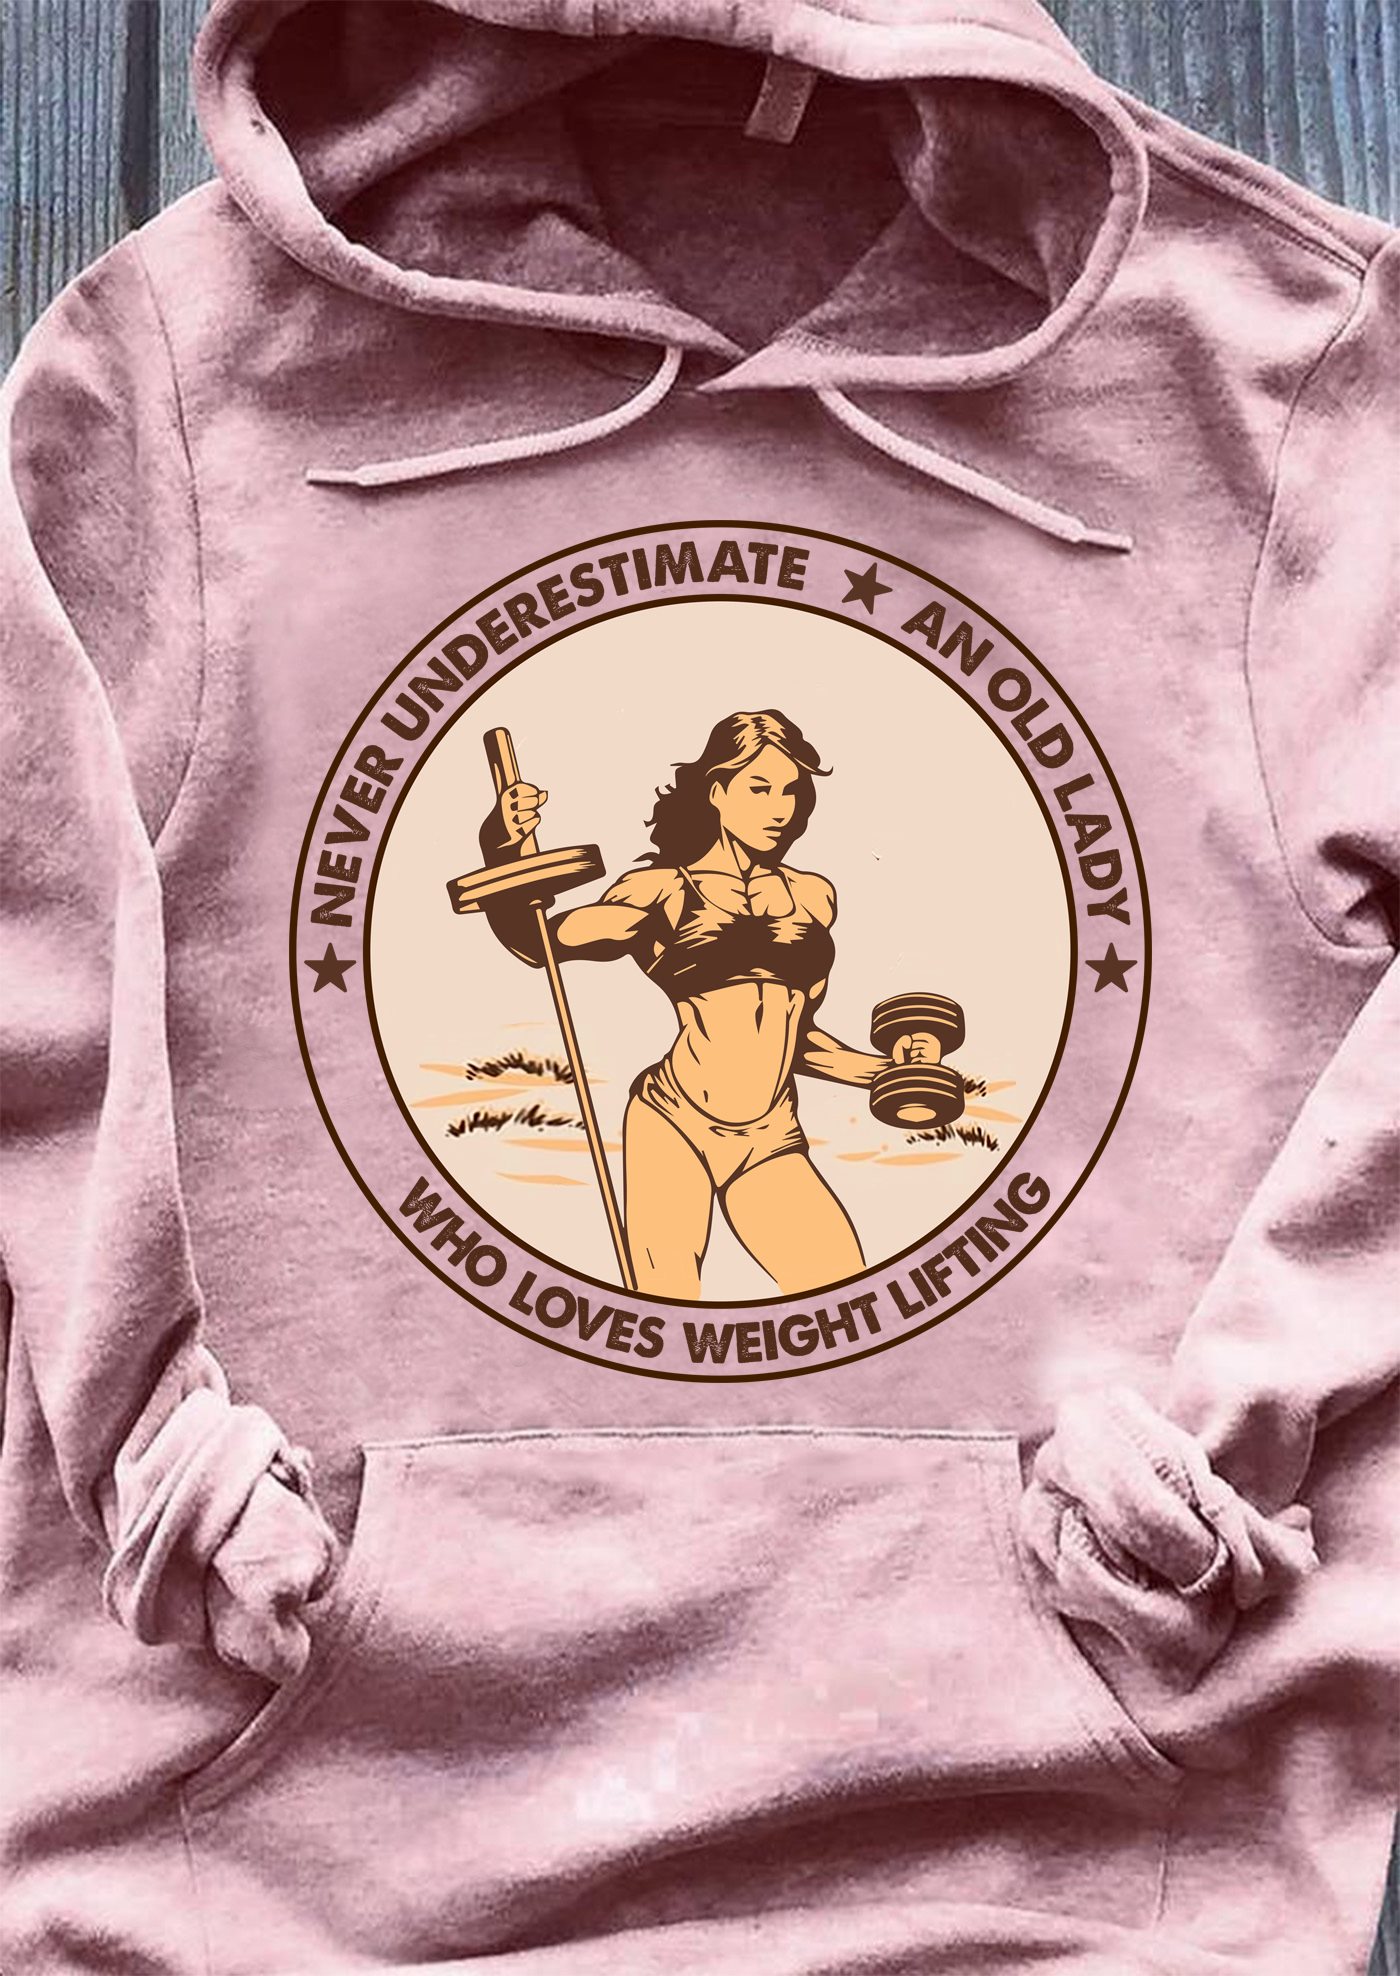 Never underestimate an old lady who loves weight lifting - Powerlifting women